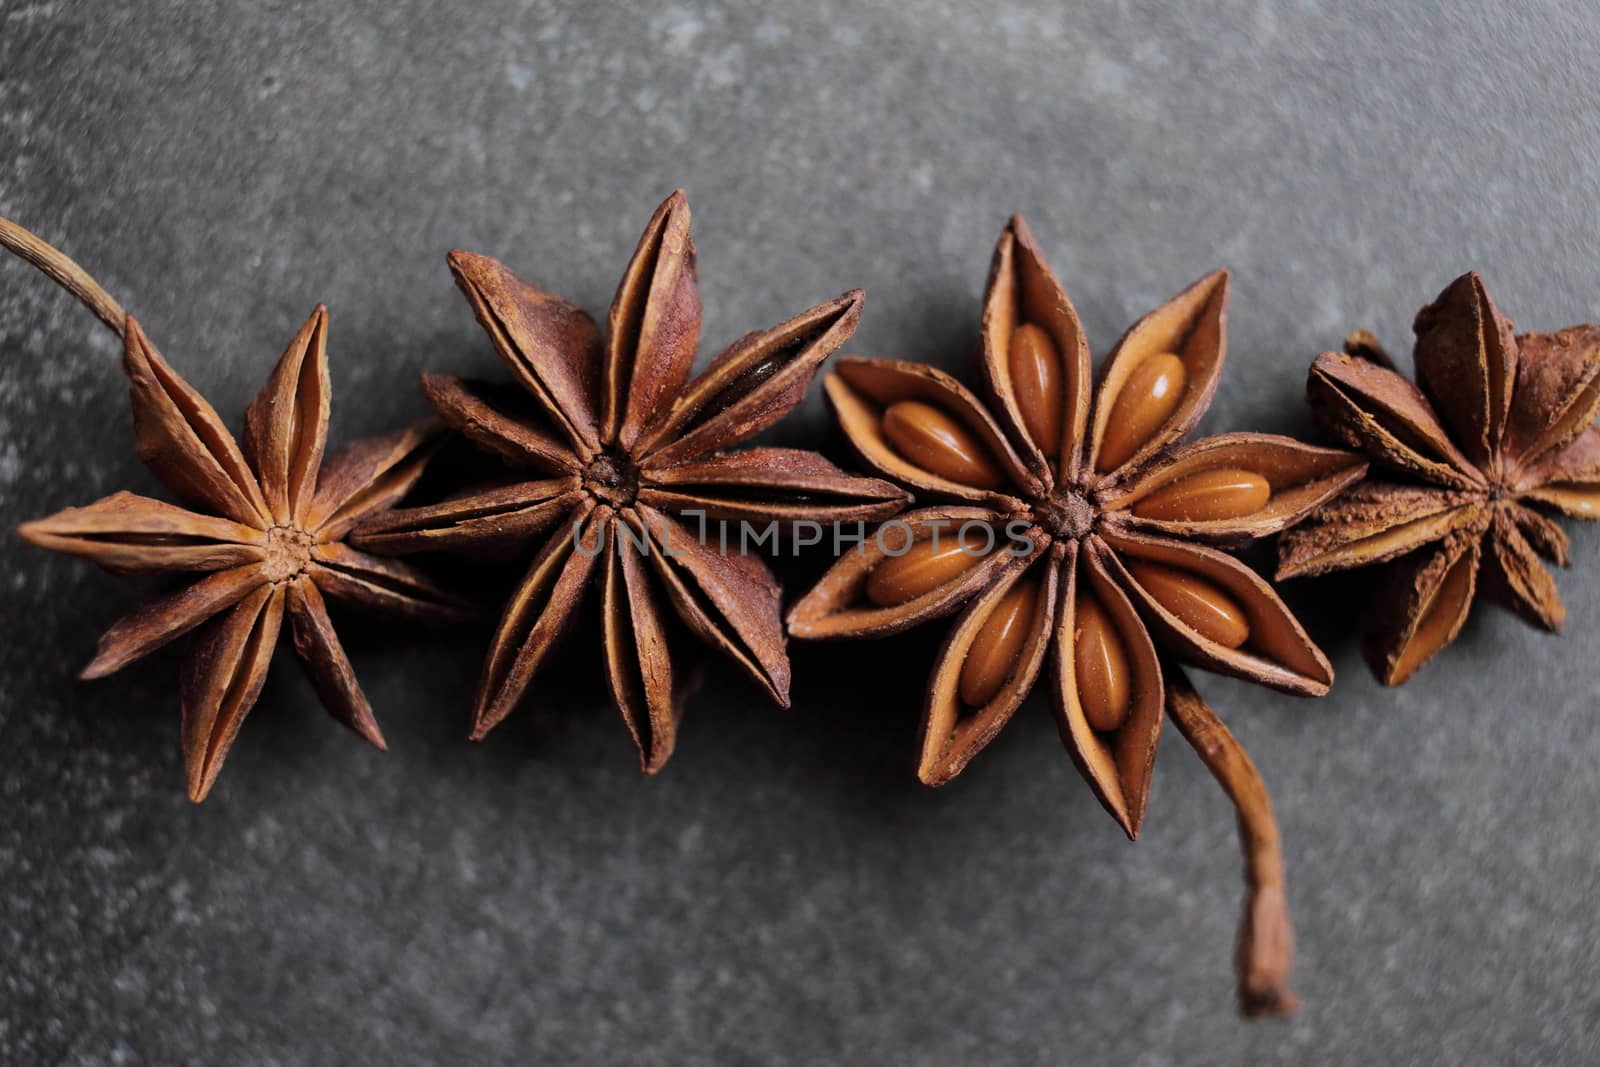 Fragrant star anise stars on a gray concrete countertop by selinsmo